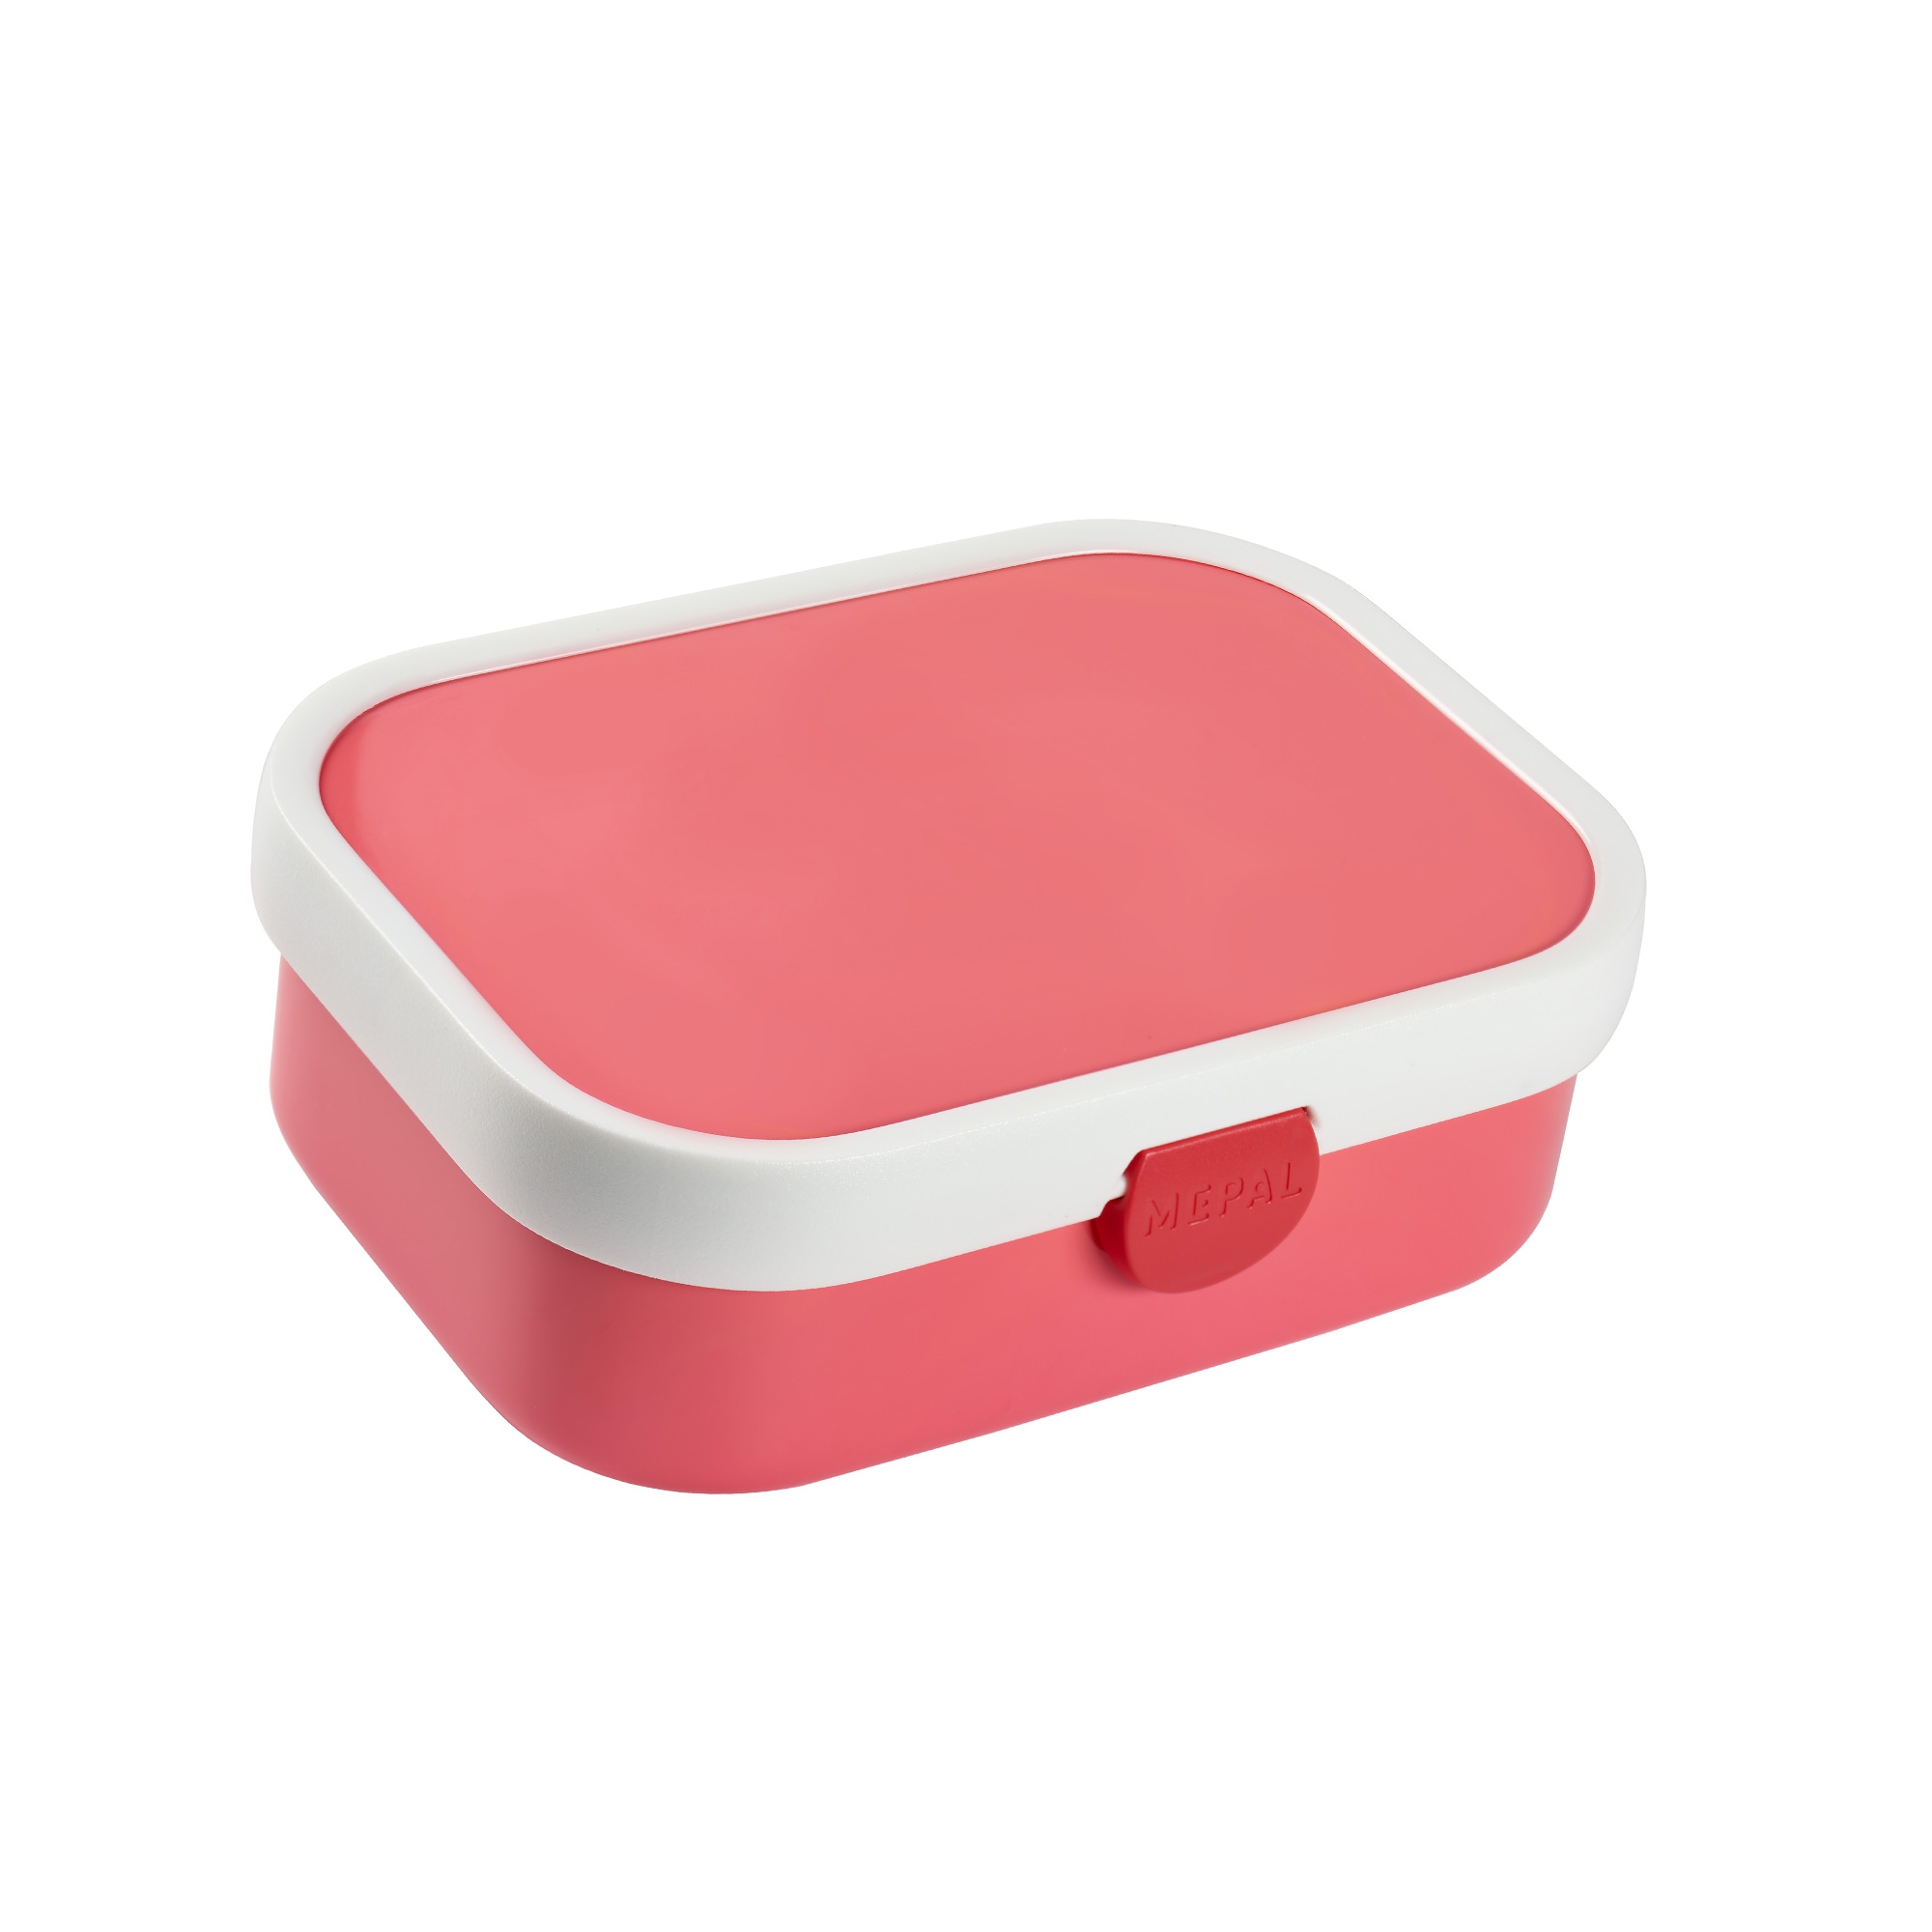 Mepal - Campus N lunch box - different colors